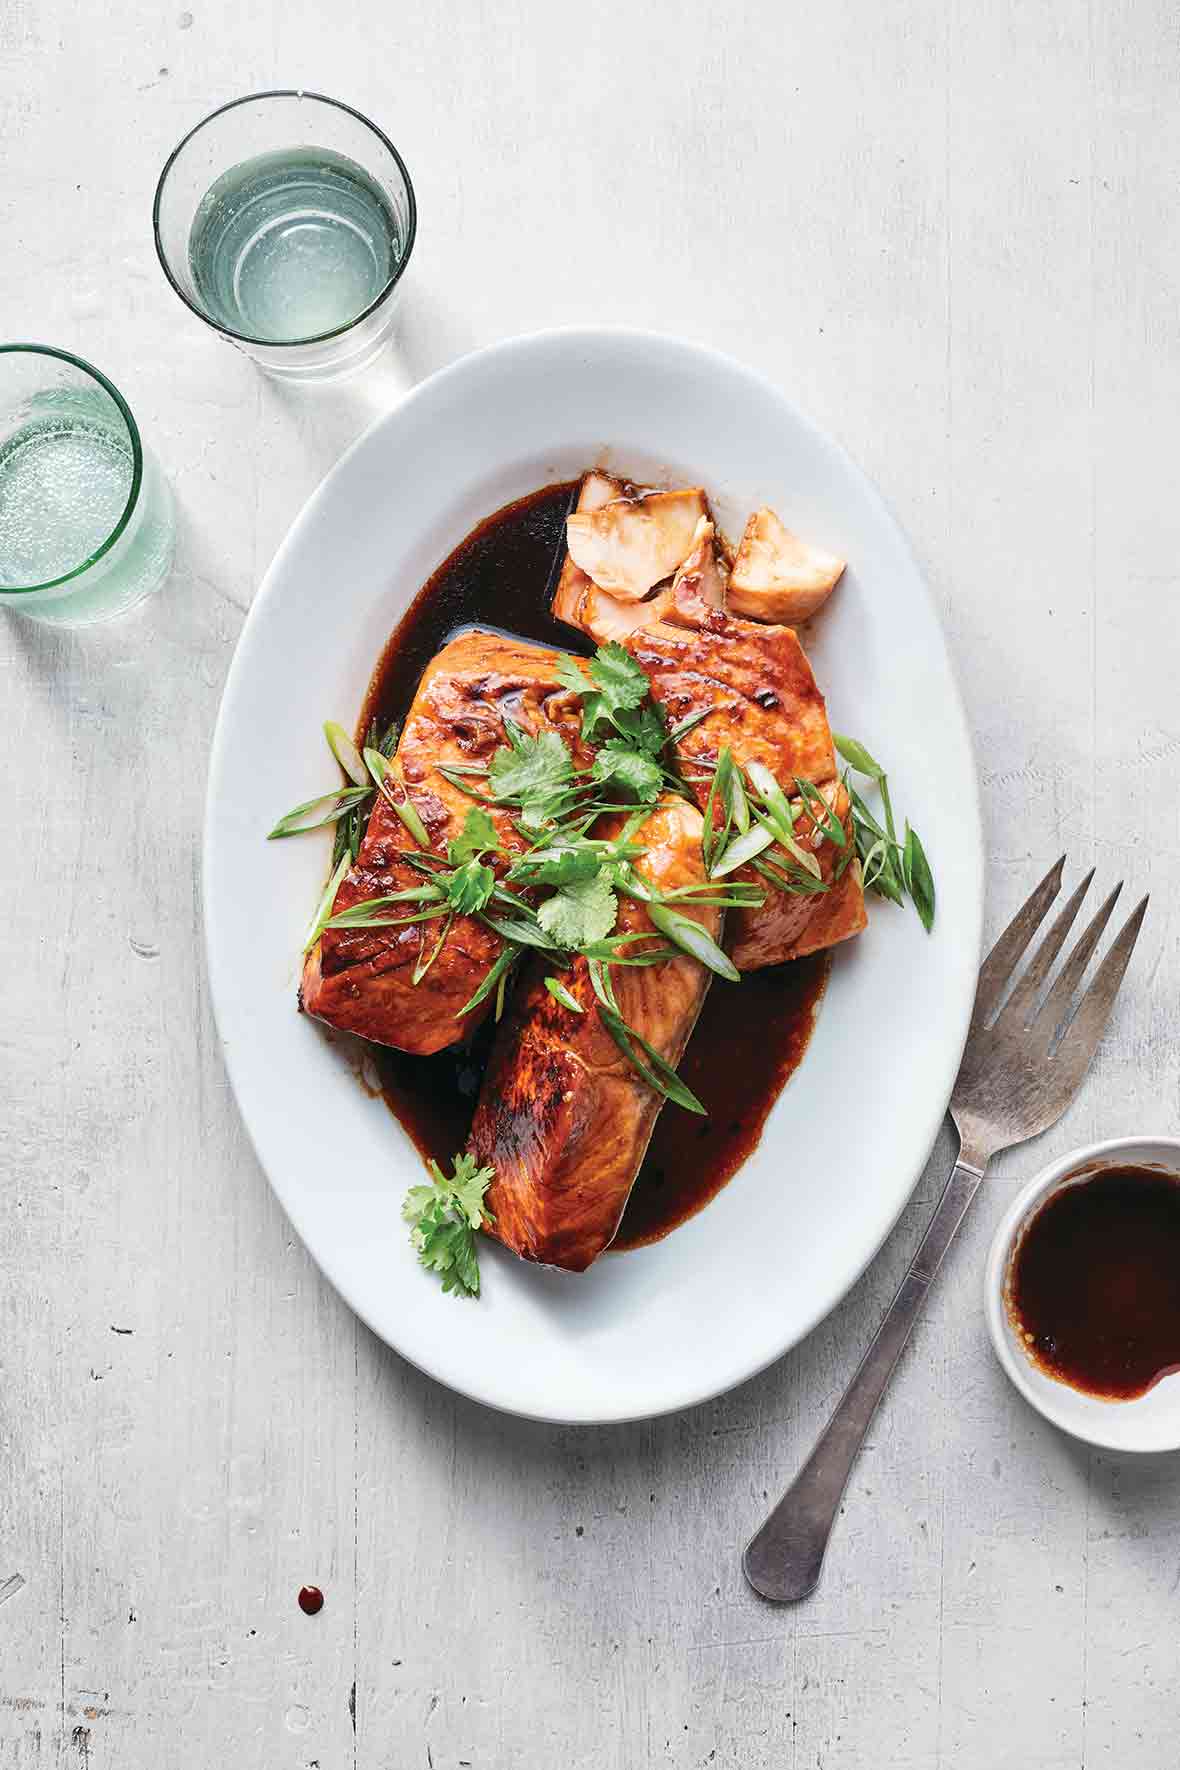 Pressure cooker Vietnamese caramel salmon, sliced green onion, and soy sauce on a white plate